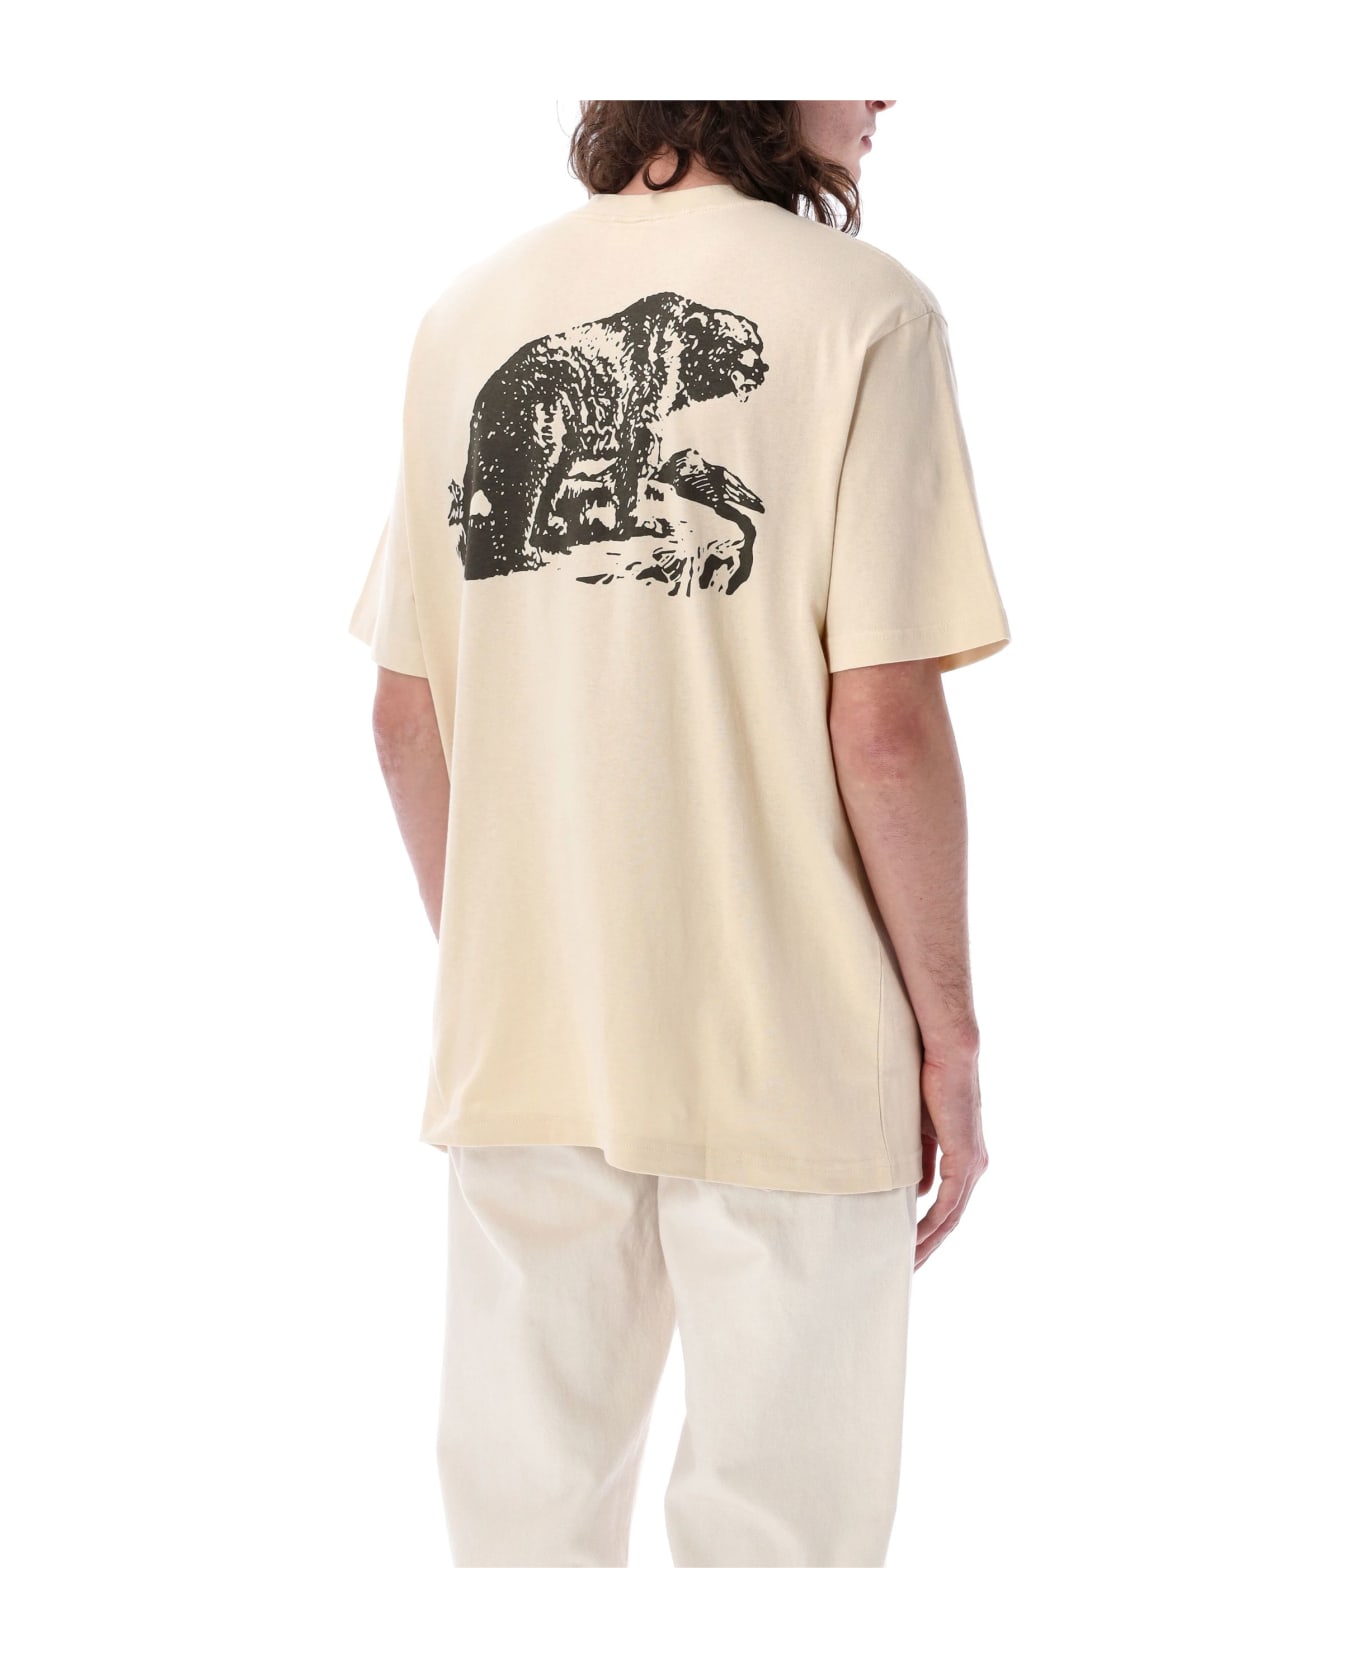 Filson Frontier Graphic T-shirt - NATURAL シャツ